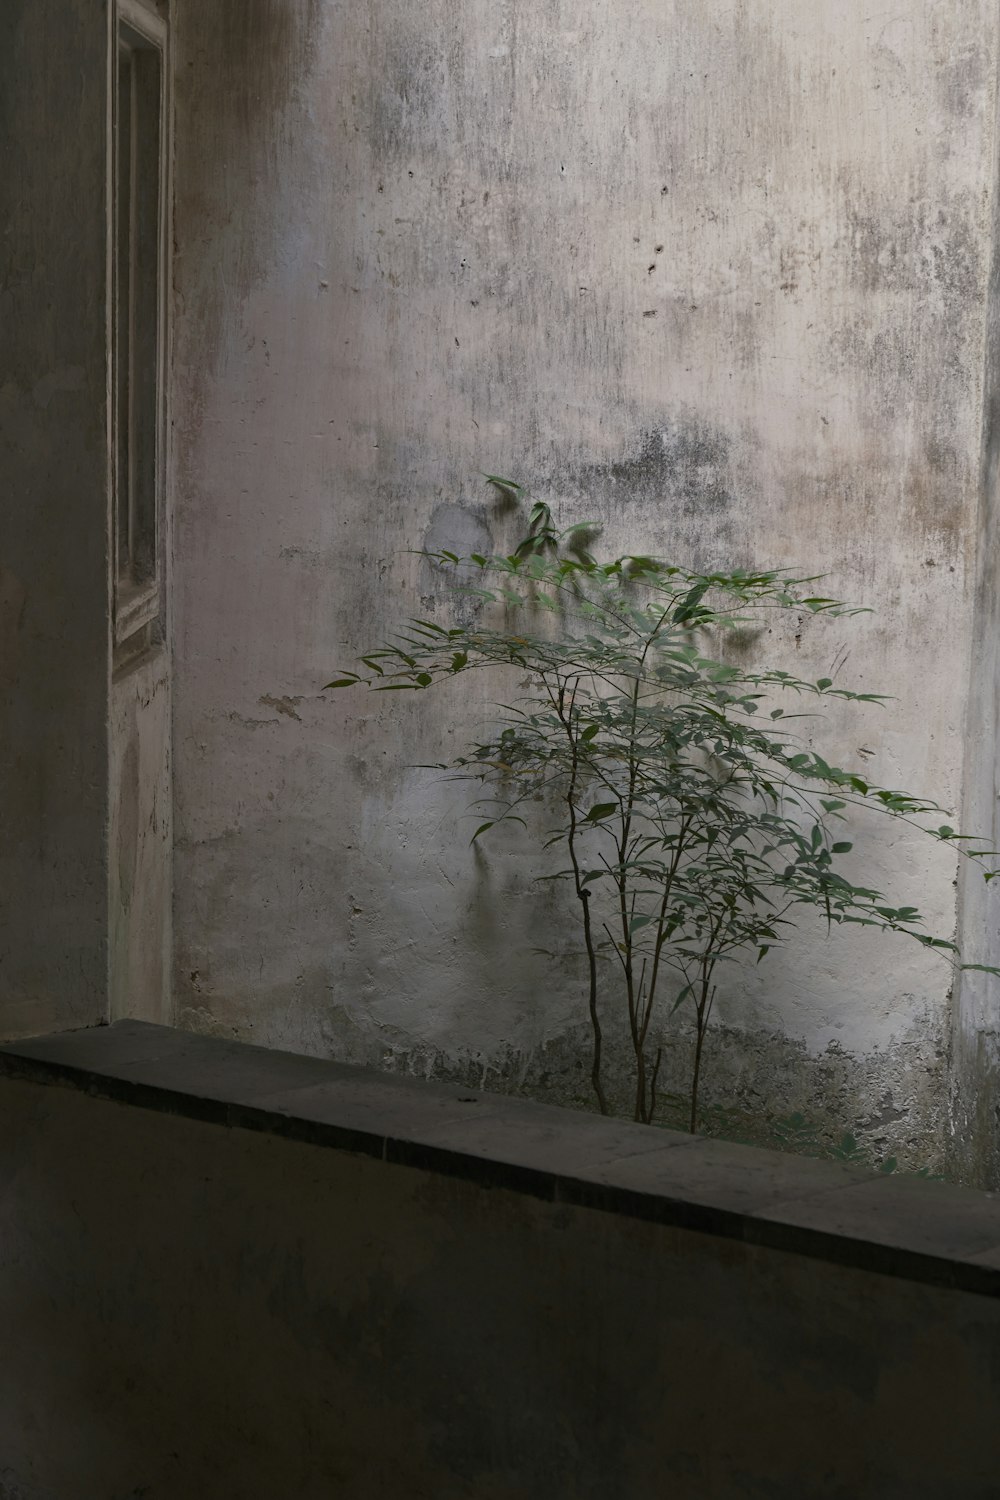 a small tree in a room with a window